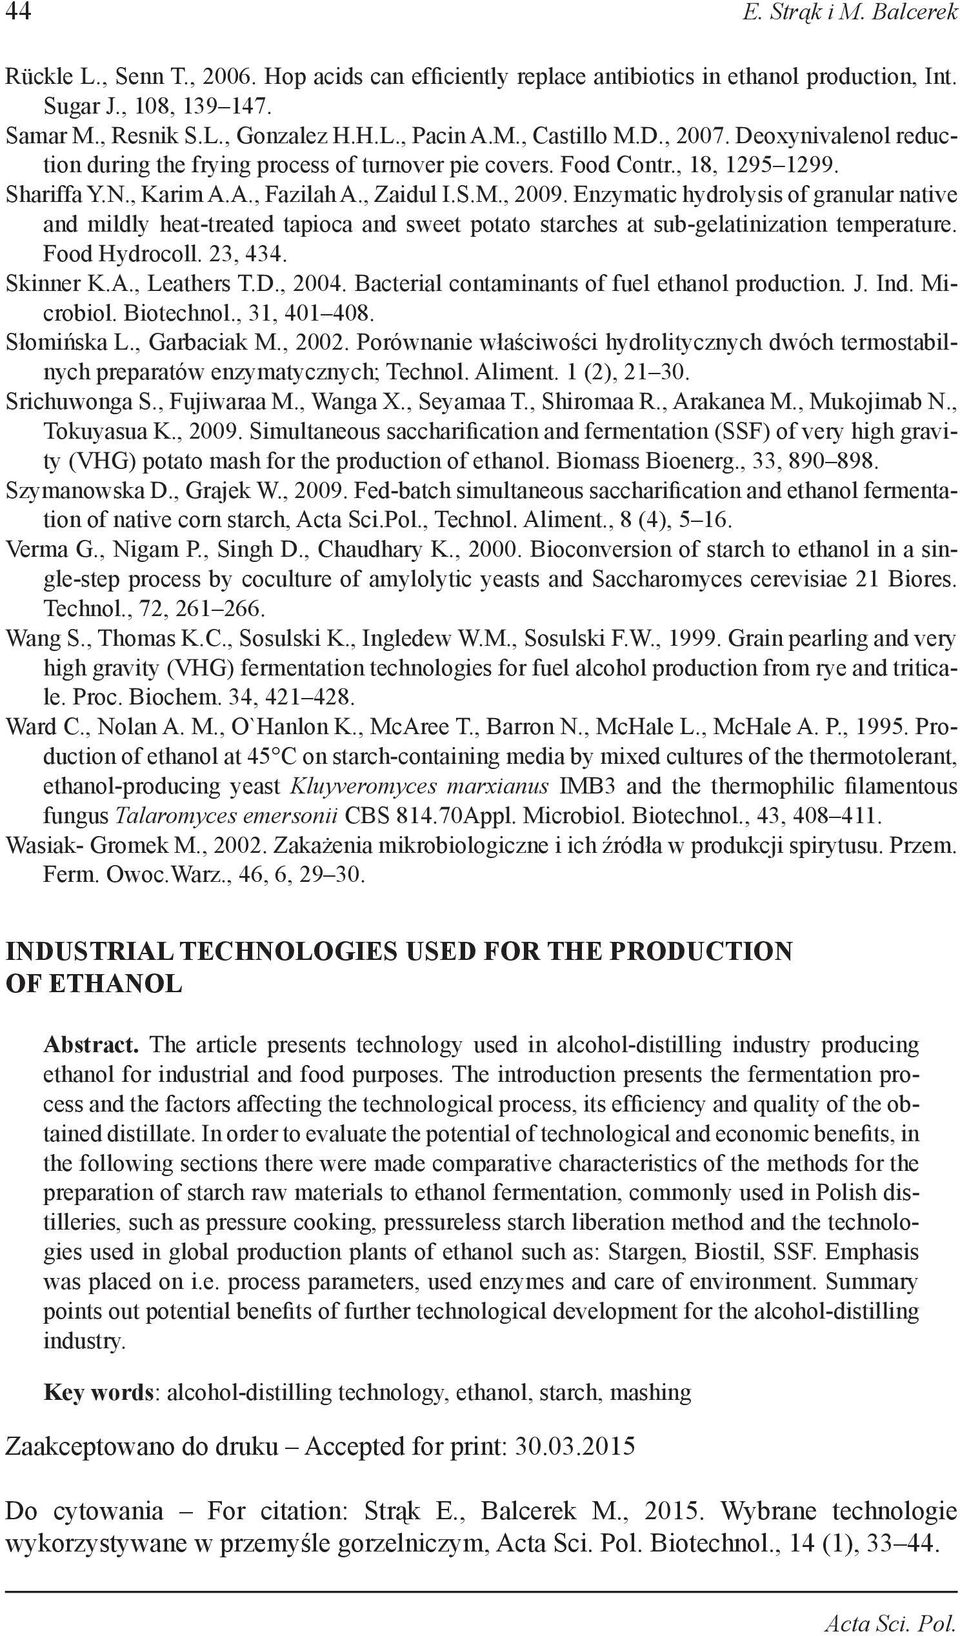 Enzymatic hydrolysis of granular native and mildly heat-treated tapioca and sweet potato starches at sub-gelatinization temperature. Food Hydrocoll. 23, 434. Skinner K.A., Leathers T.D., 2004.